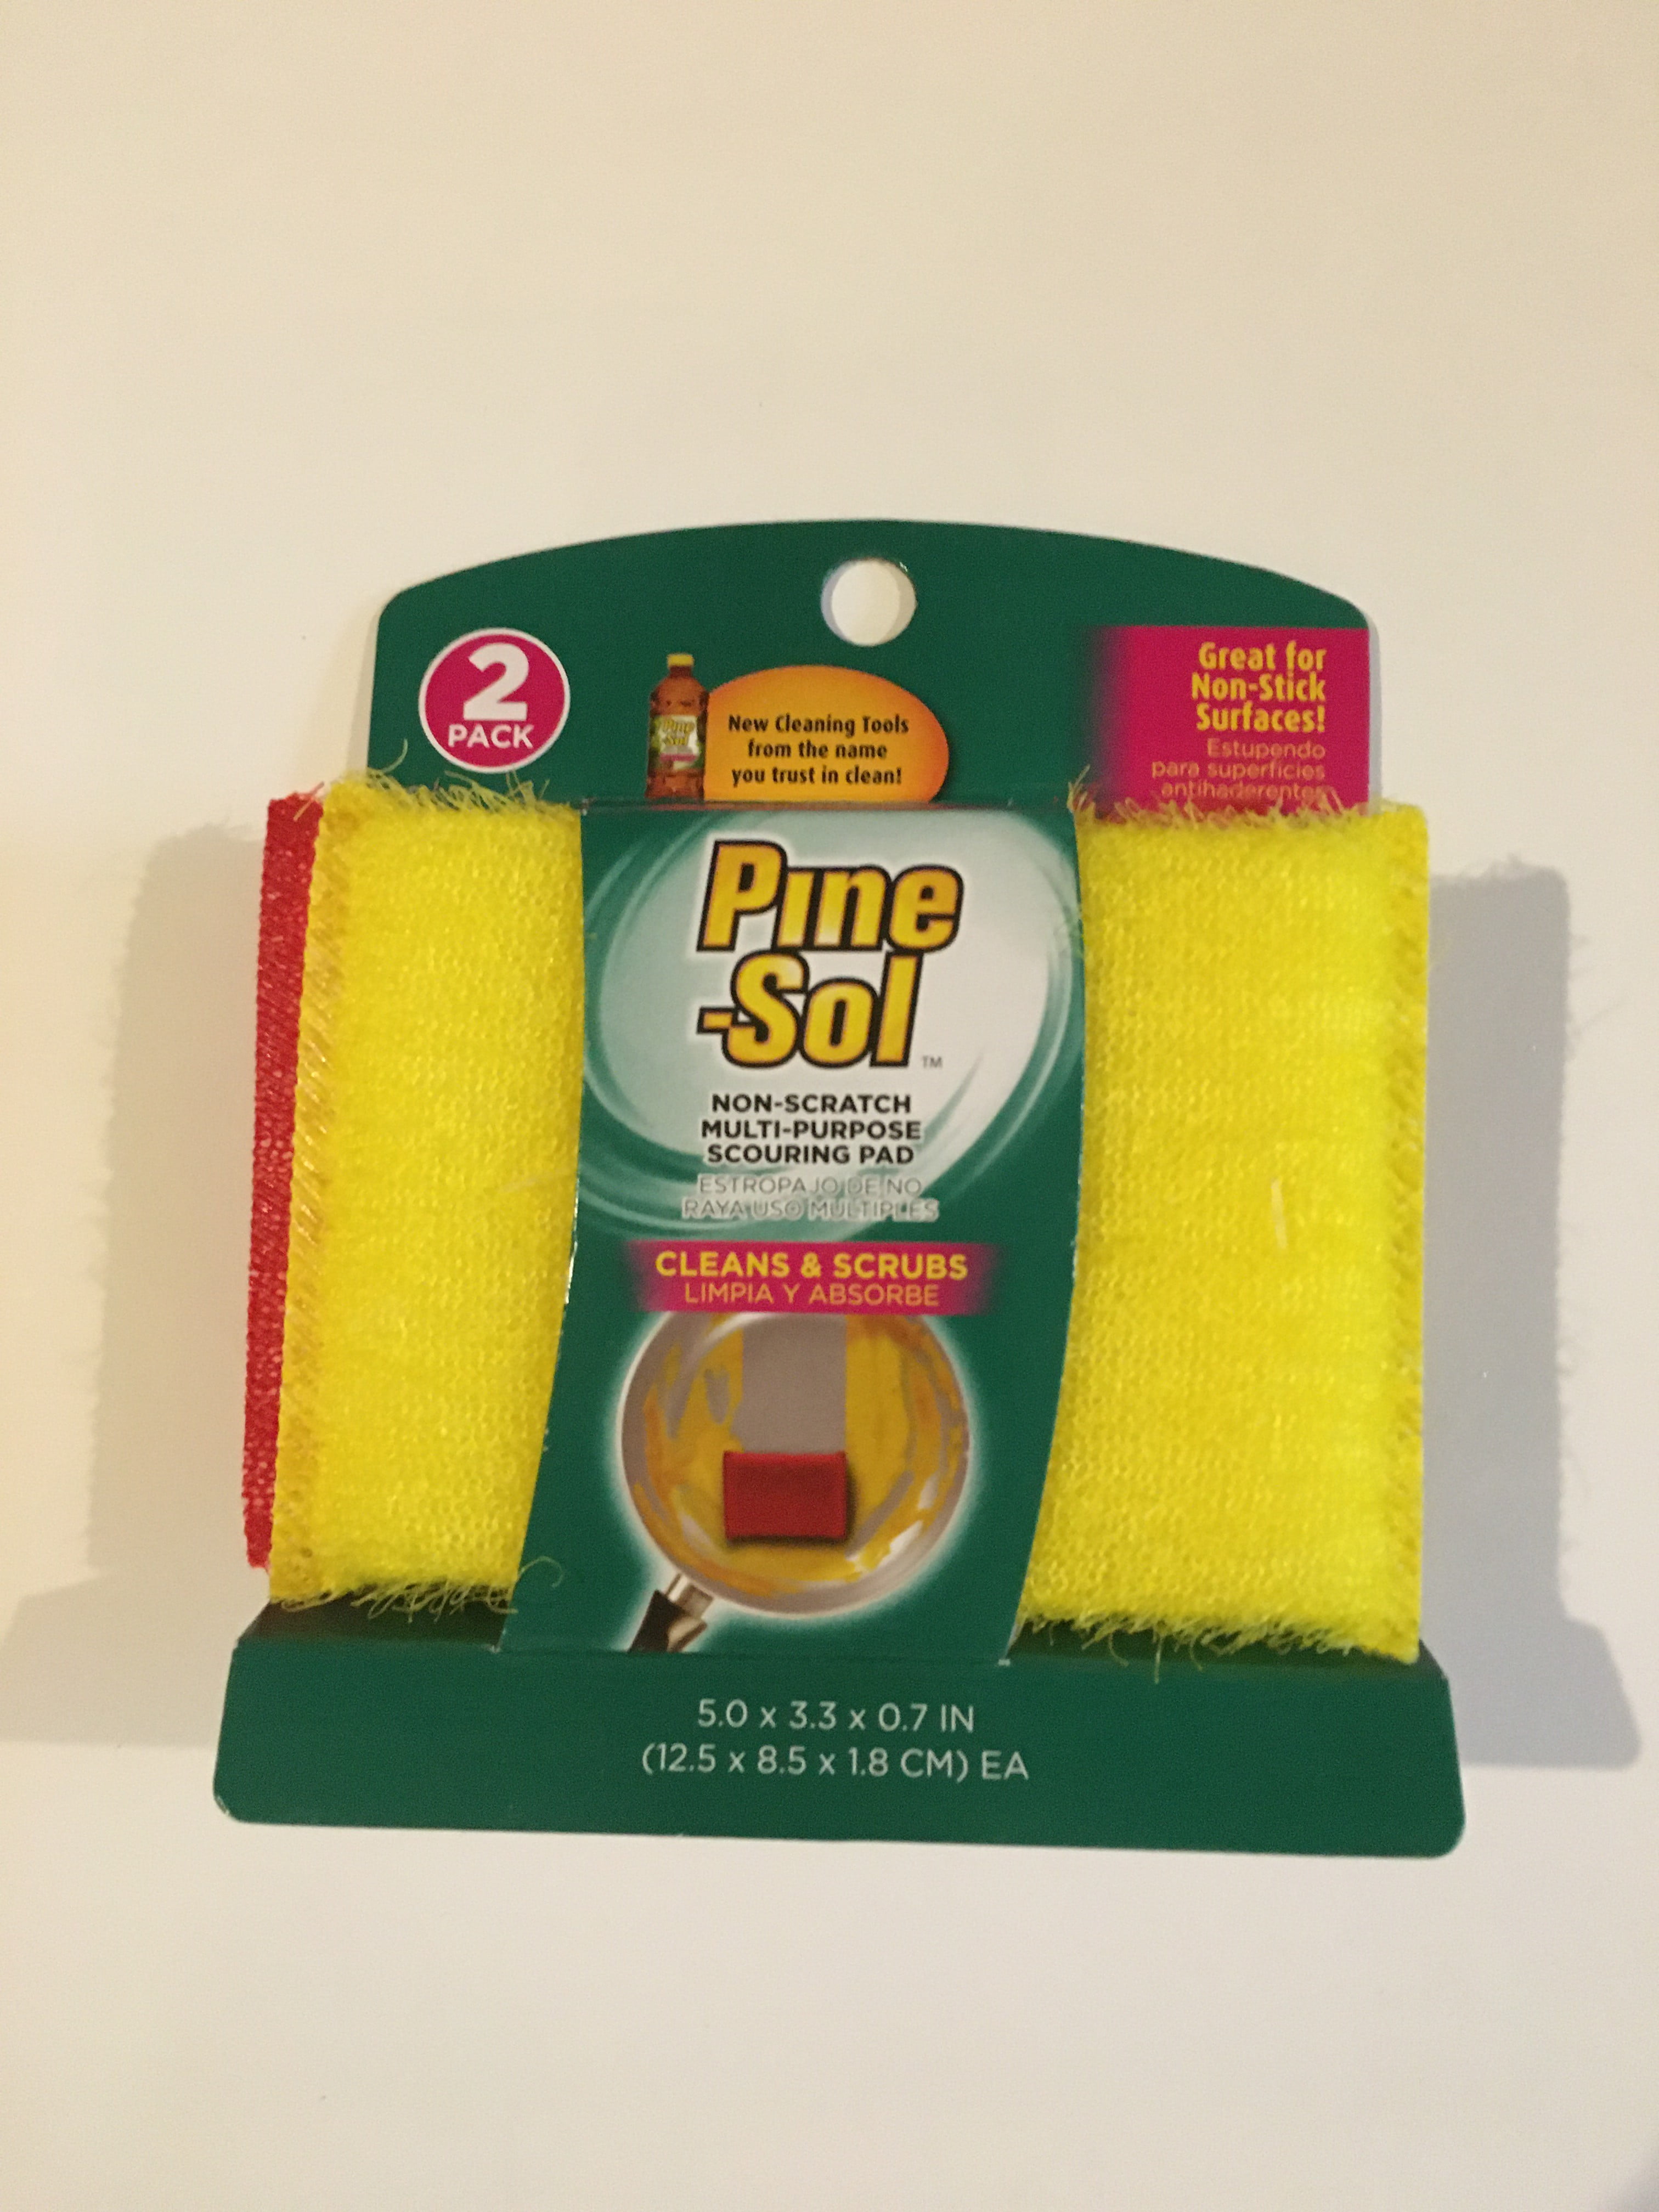 Photo 1 of Pine-Sol NON-SCRATCH, MULTI-PURPOSE SCOURING PAD + Pine-Sol Non Scratch Scouring Pads - Household Scrubbing Tool for Cleaning Nonstick Cookware and Surfaces - 3 Pack
